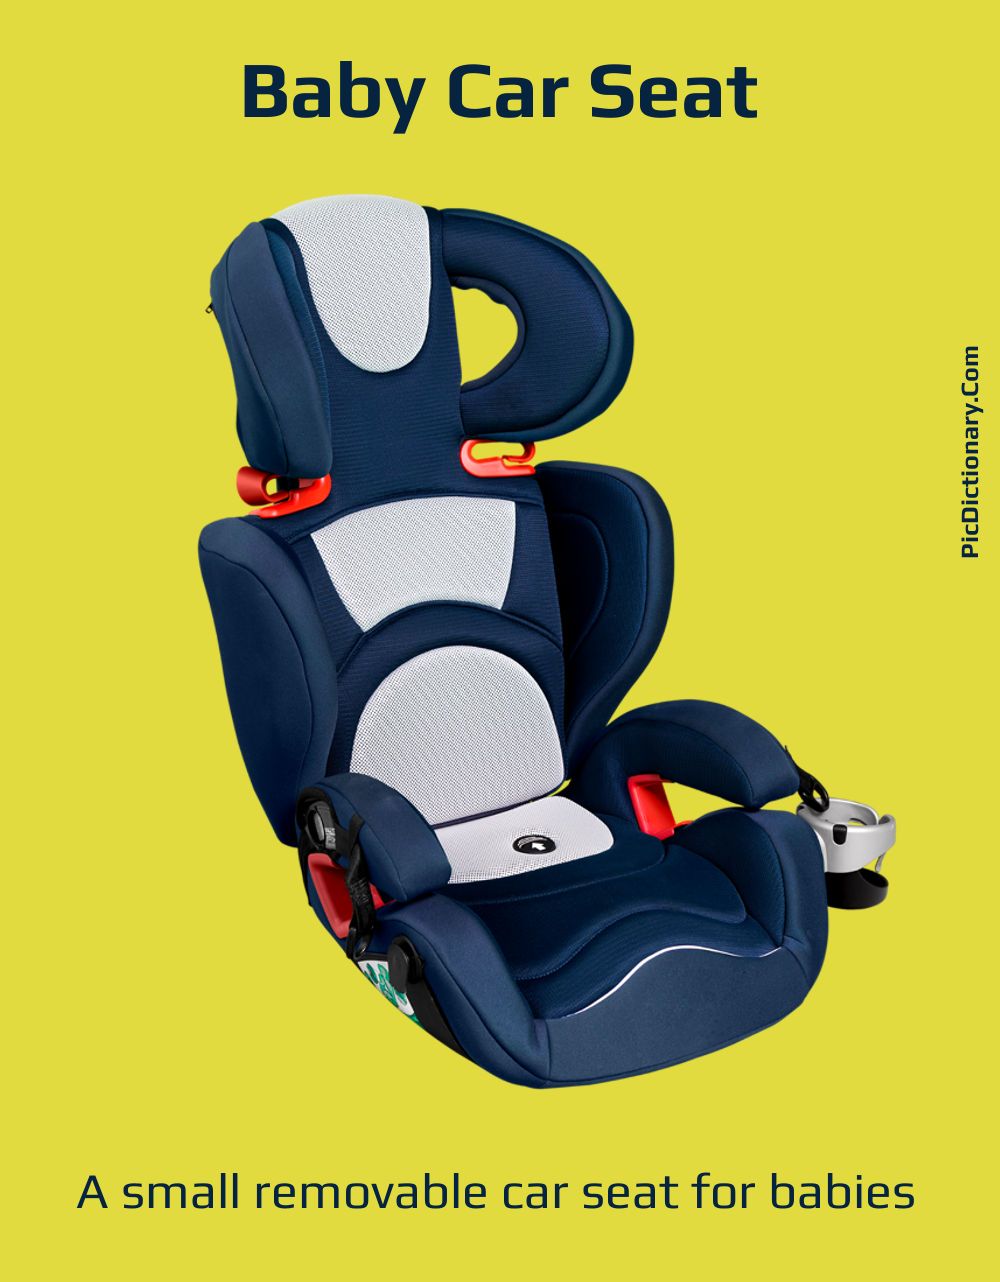 Dictionary meaning of Baby Car Seat